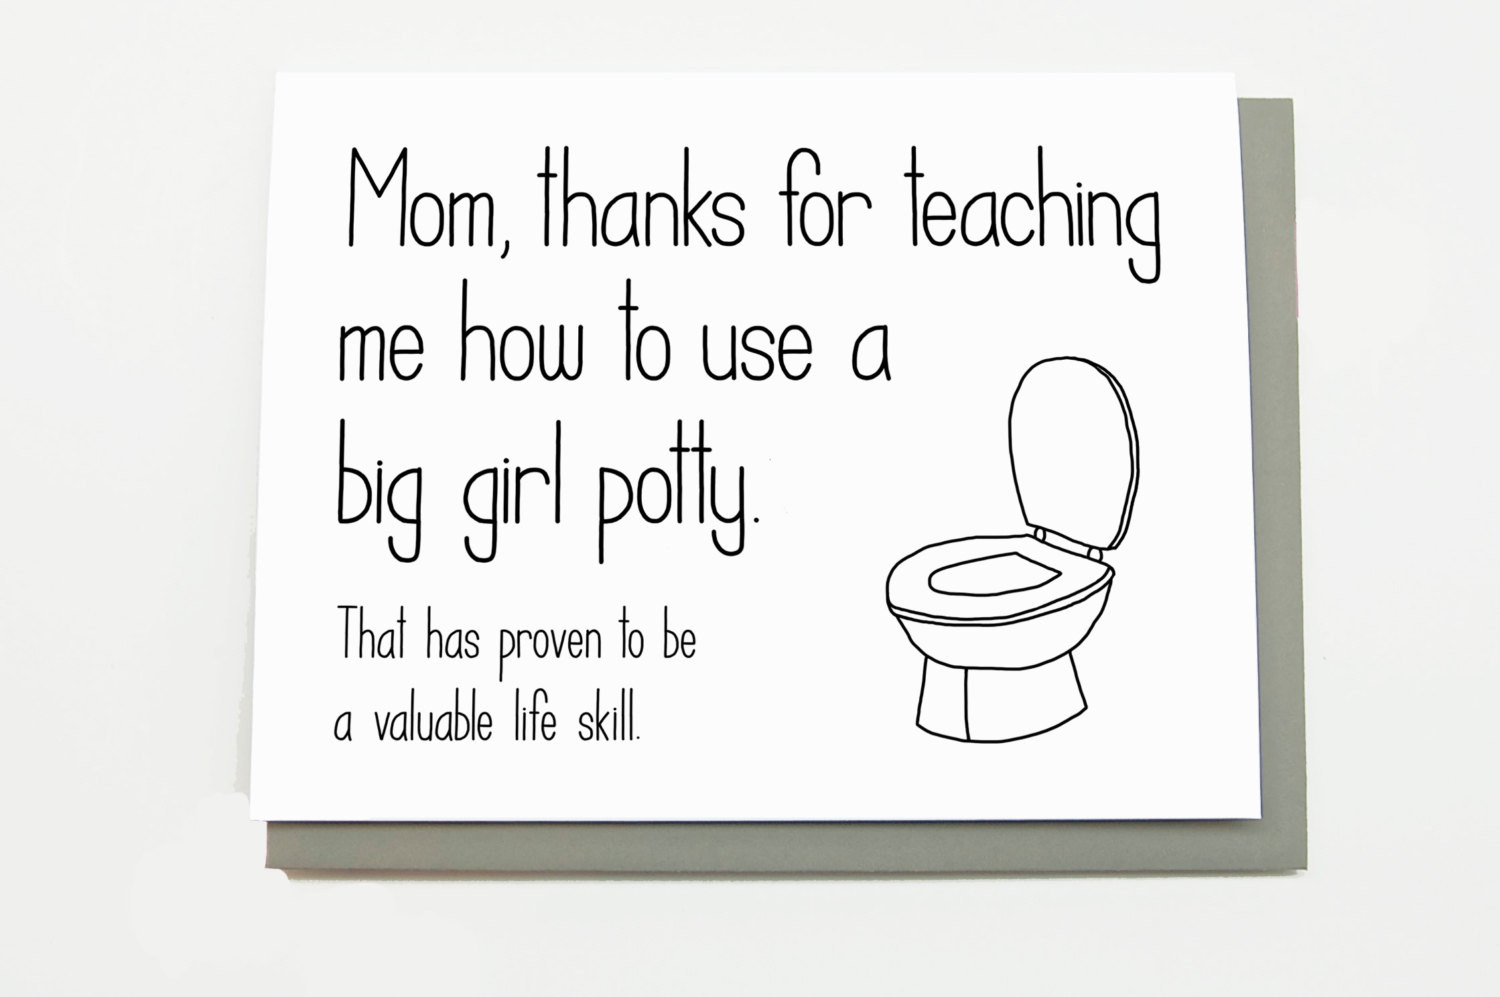 Funny Mother Birthday Quotes
 Funny Mother s Day Card Big Girl Potty Mum Mom by